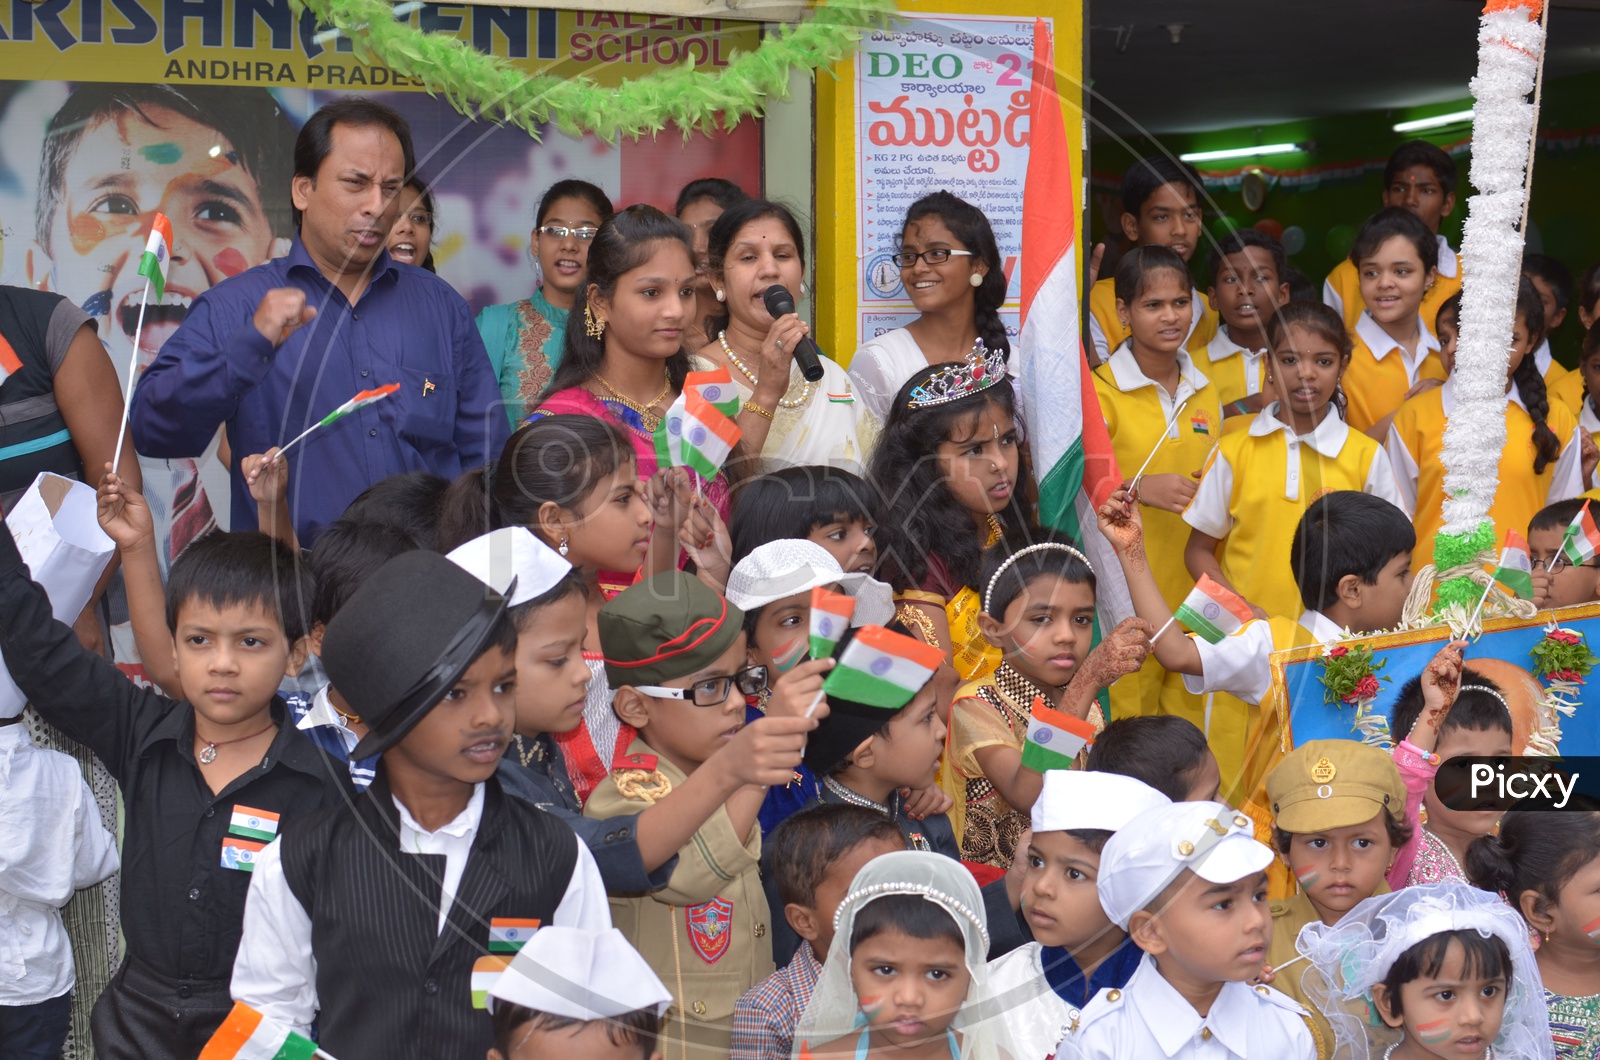 Children Celebrating Indipendence Day in India / Indian Children Smiling Faces / Childrens Wearing Indian Flag on Indipendence Day